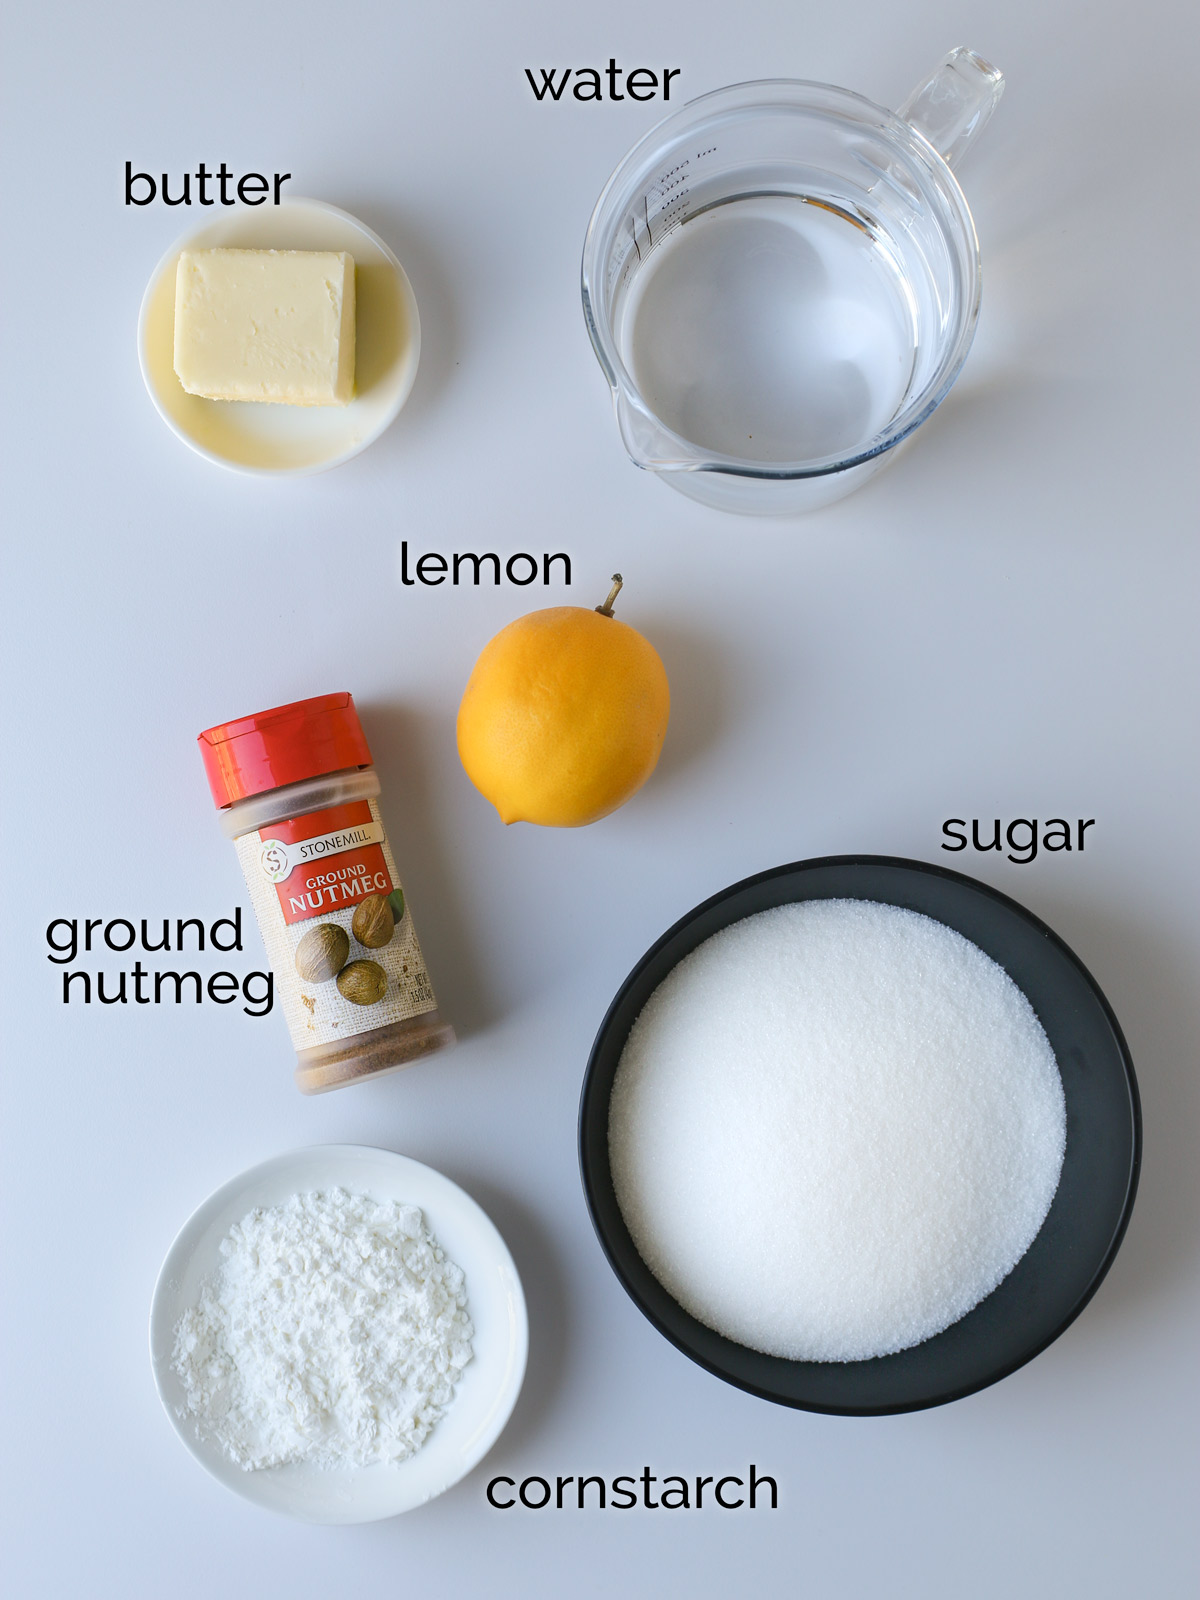 ingredients for lemon sauce laid out on white table.